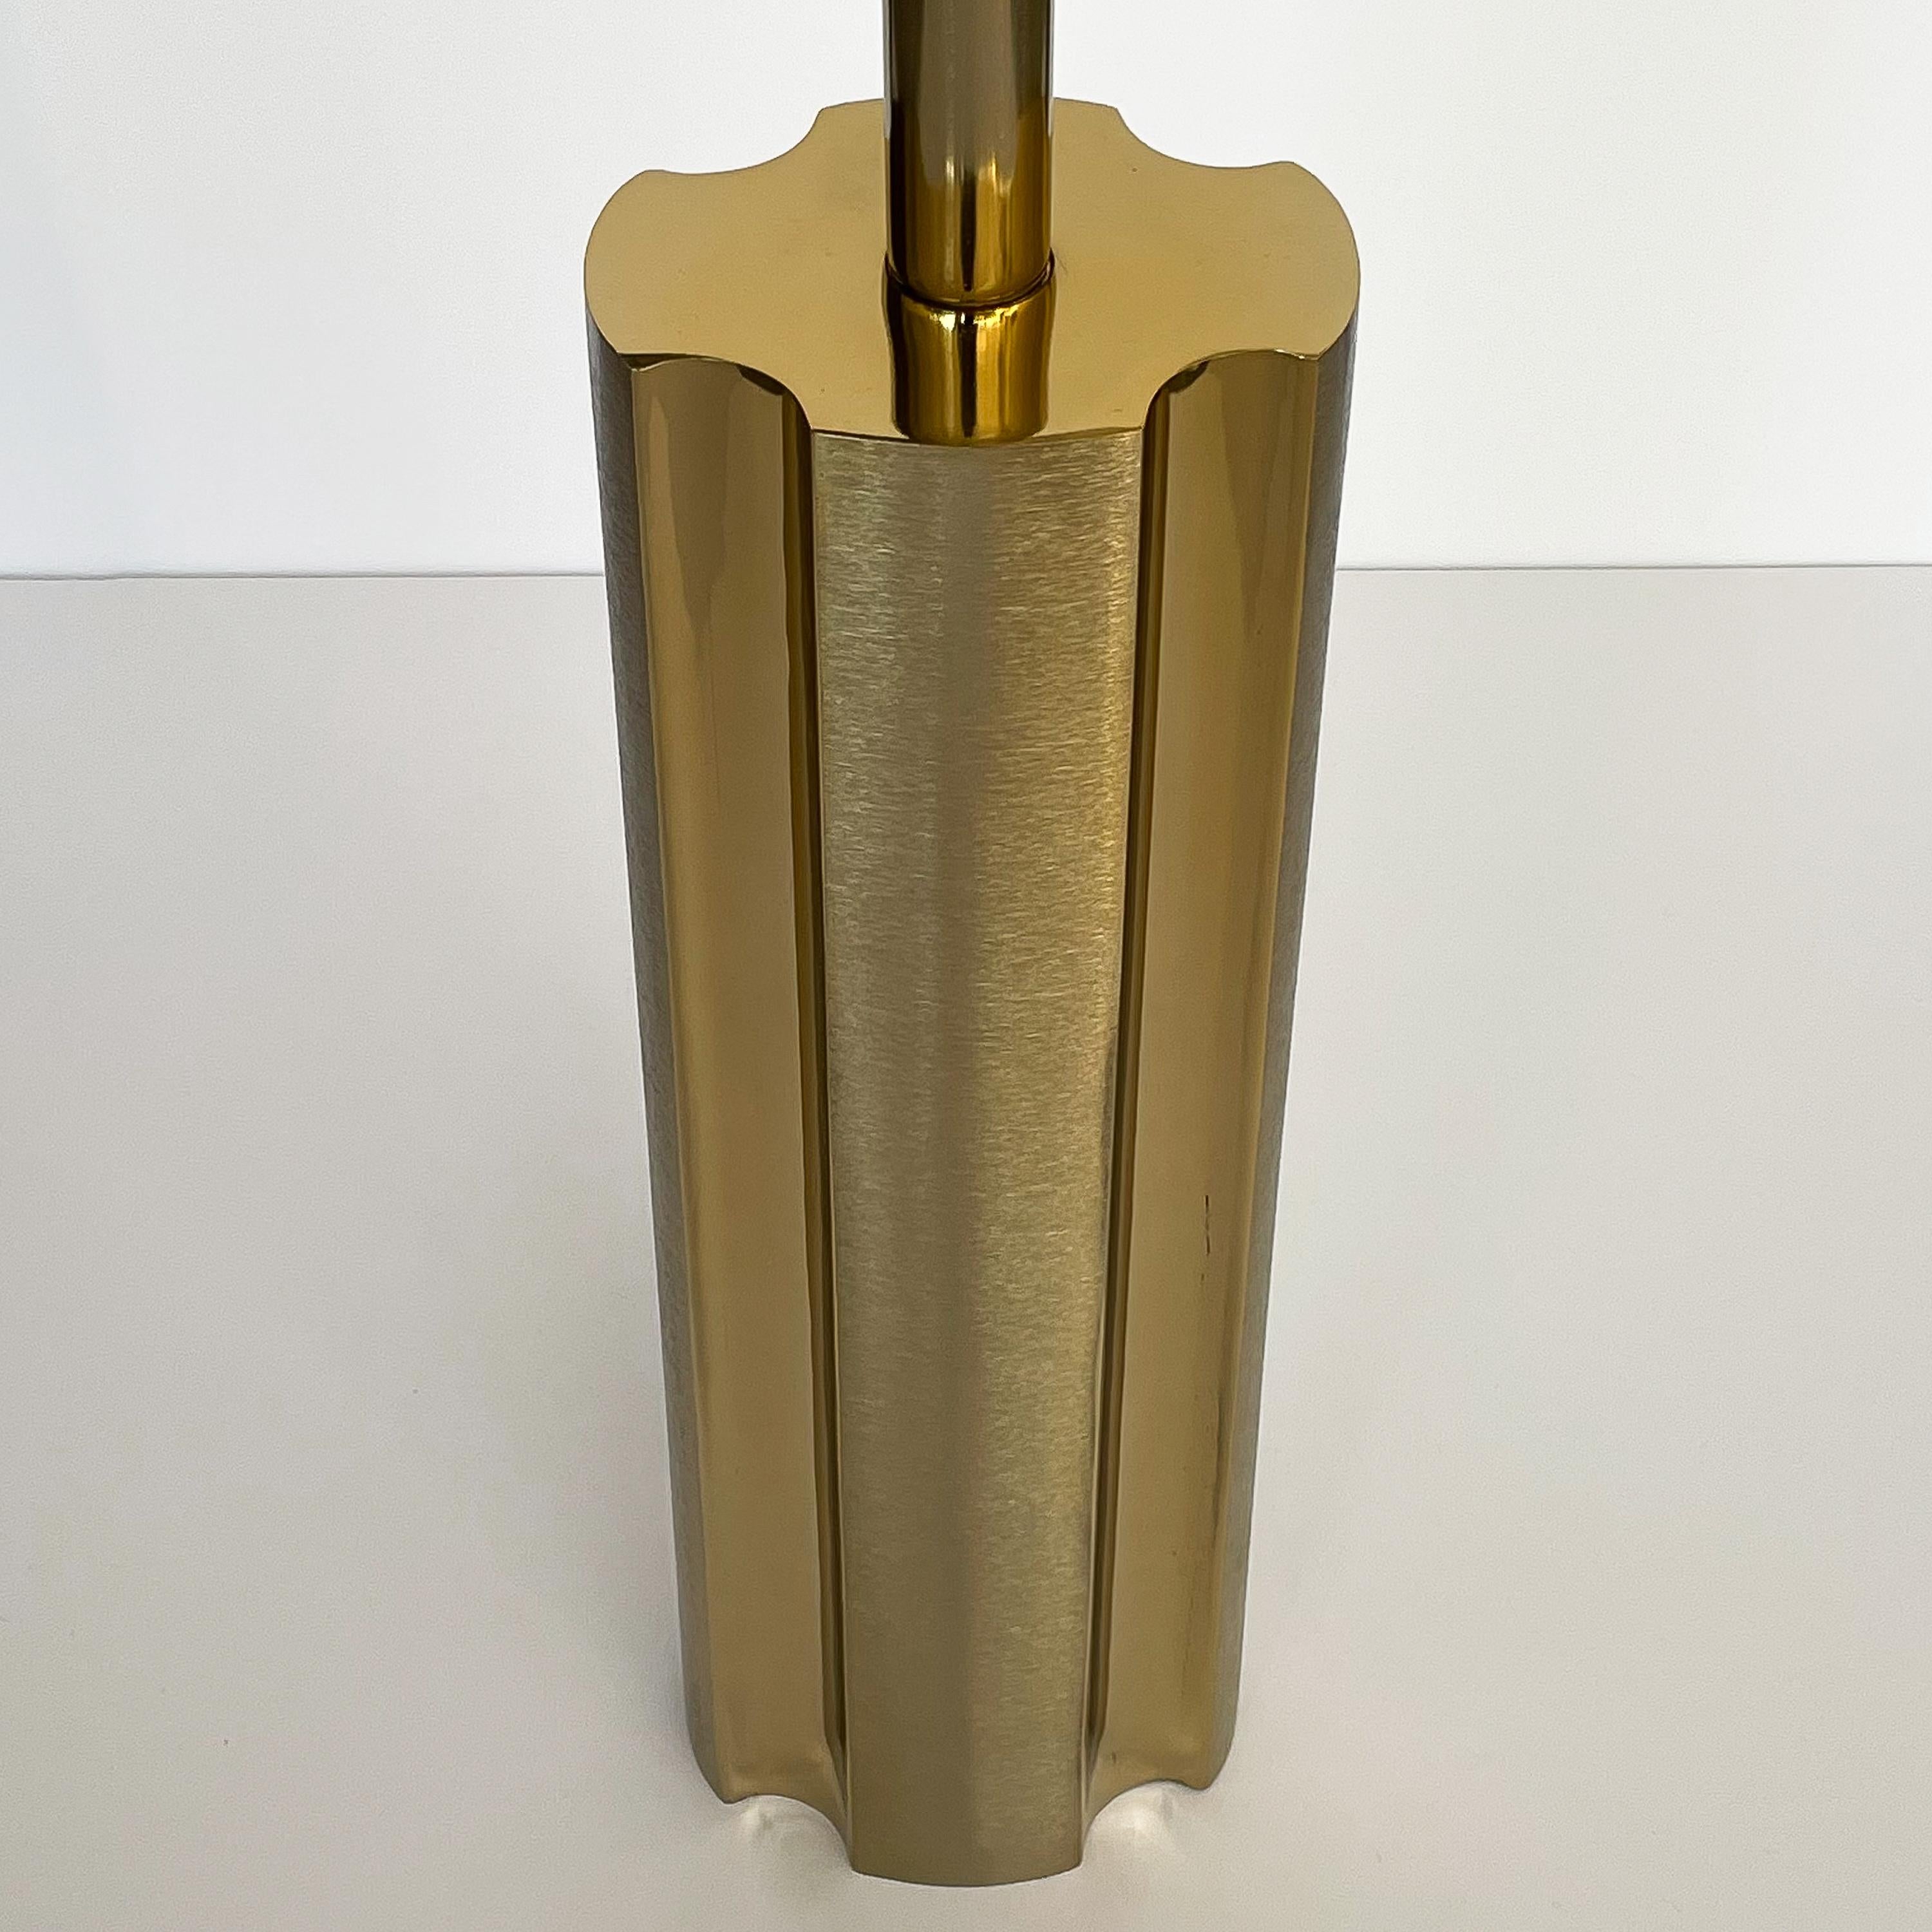 Modernist Brushed and Polished Brass Table Lamp by Laurel 1